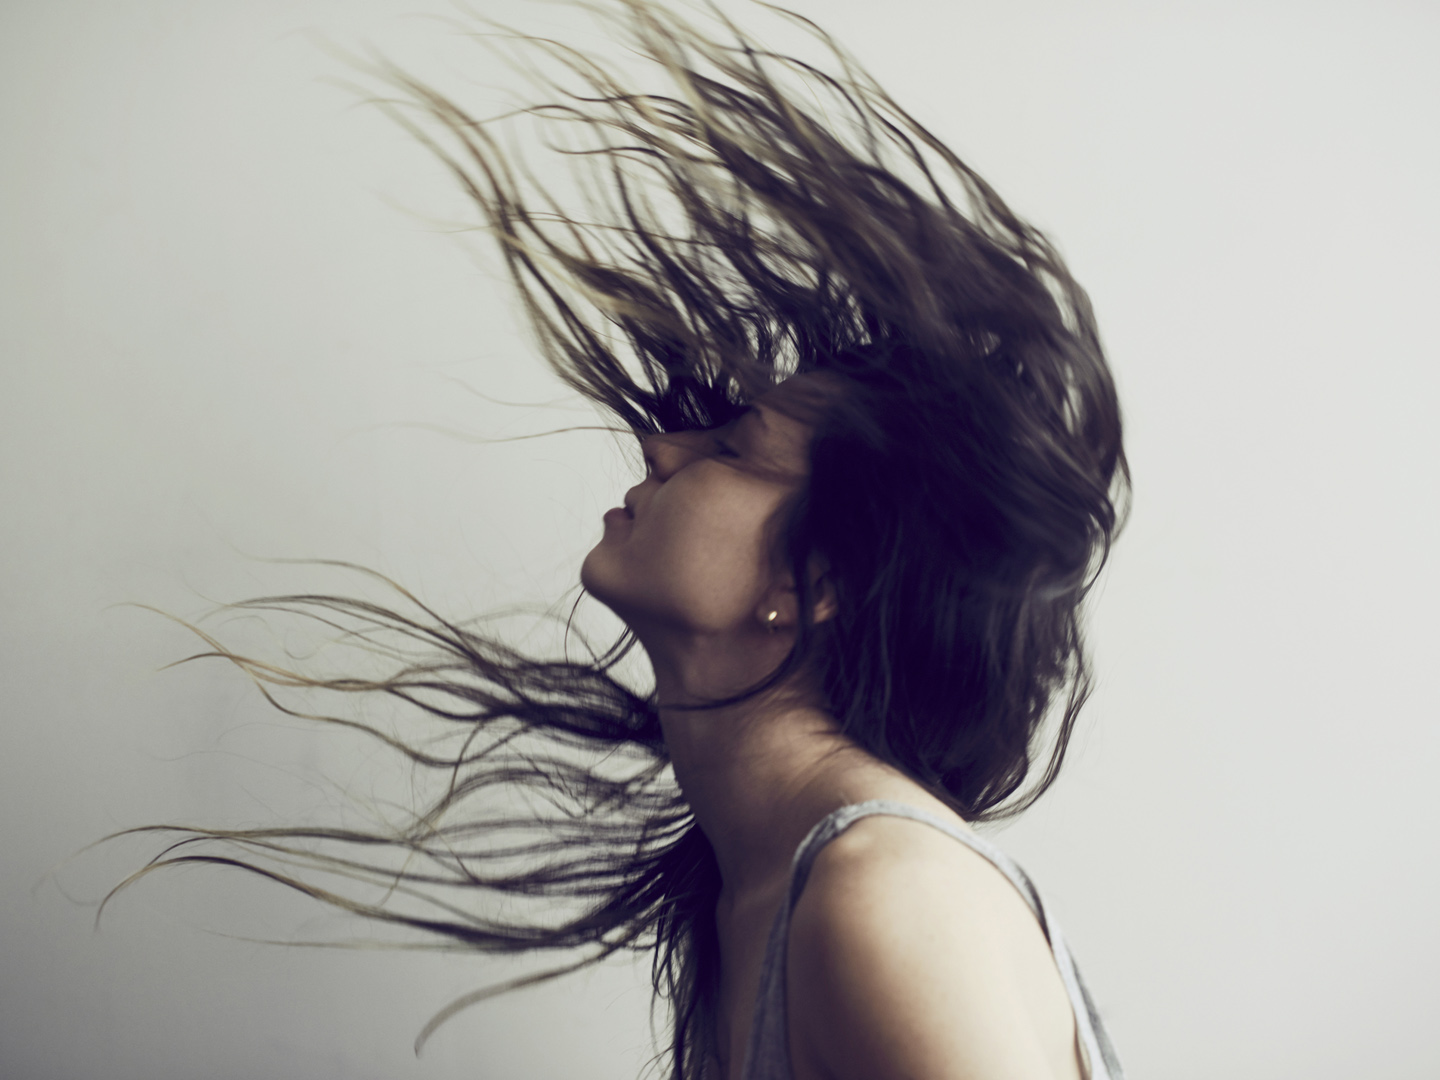 Shot of a young woman flipping her long hair backhttp://195.154.178.81/DATA/i_collage/pu/shoots/805298.jpg